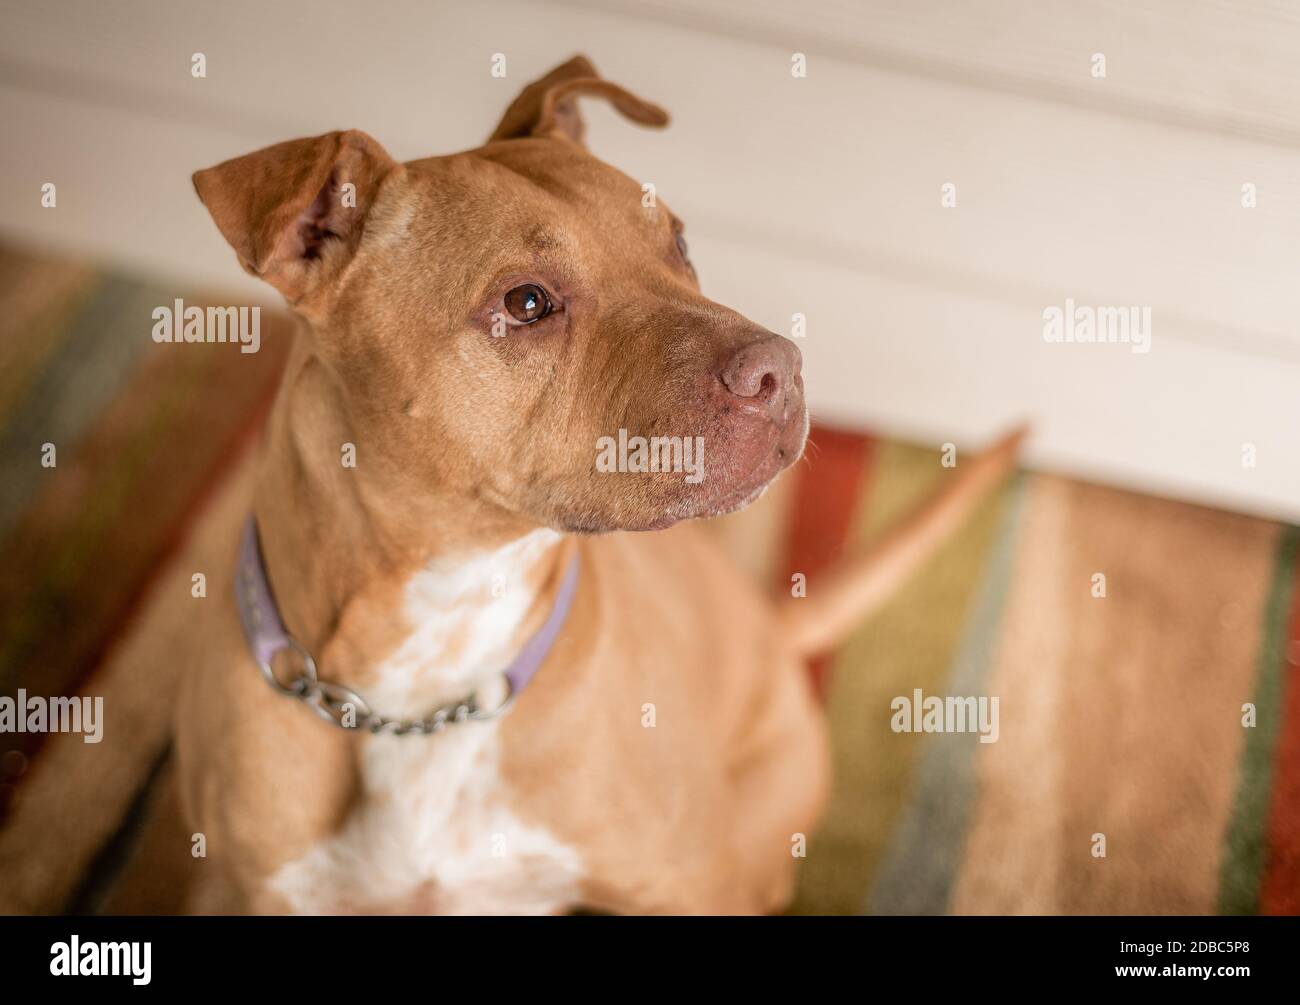 Candid portrait of young staffordshire terrier dog at animal shelter Stock Photo